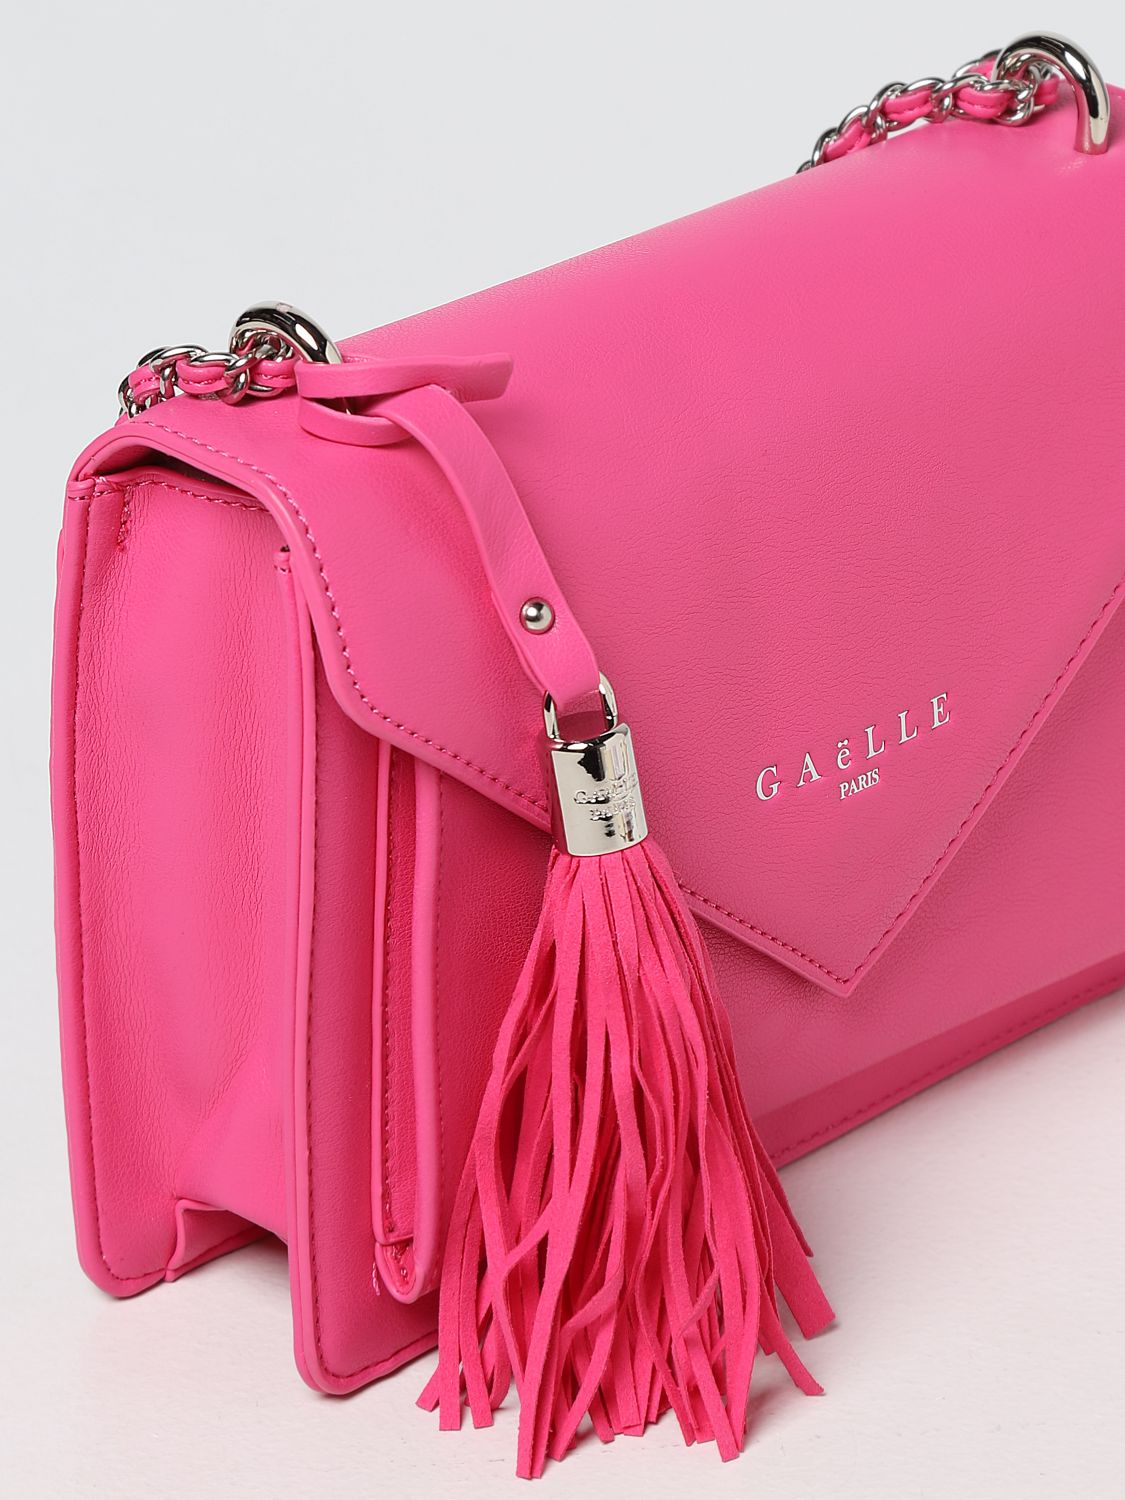 Gaëlle Paris bag in synthetic leather